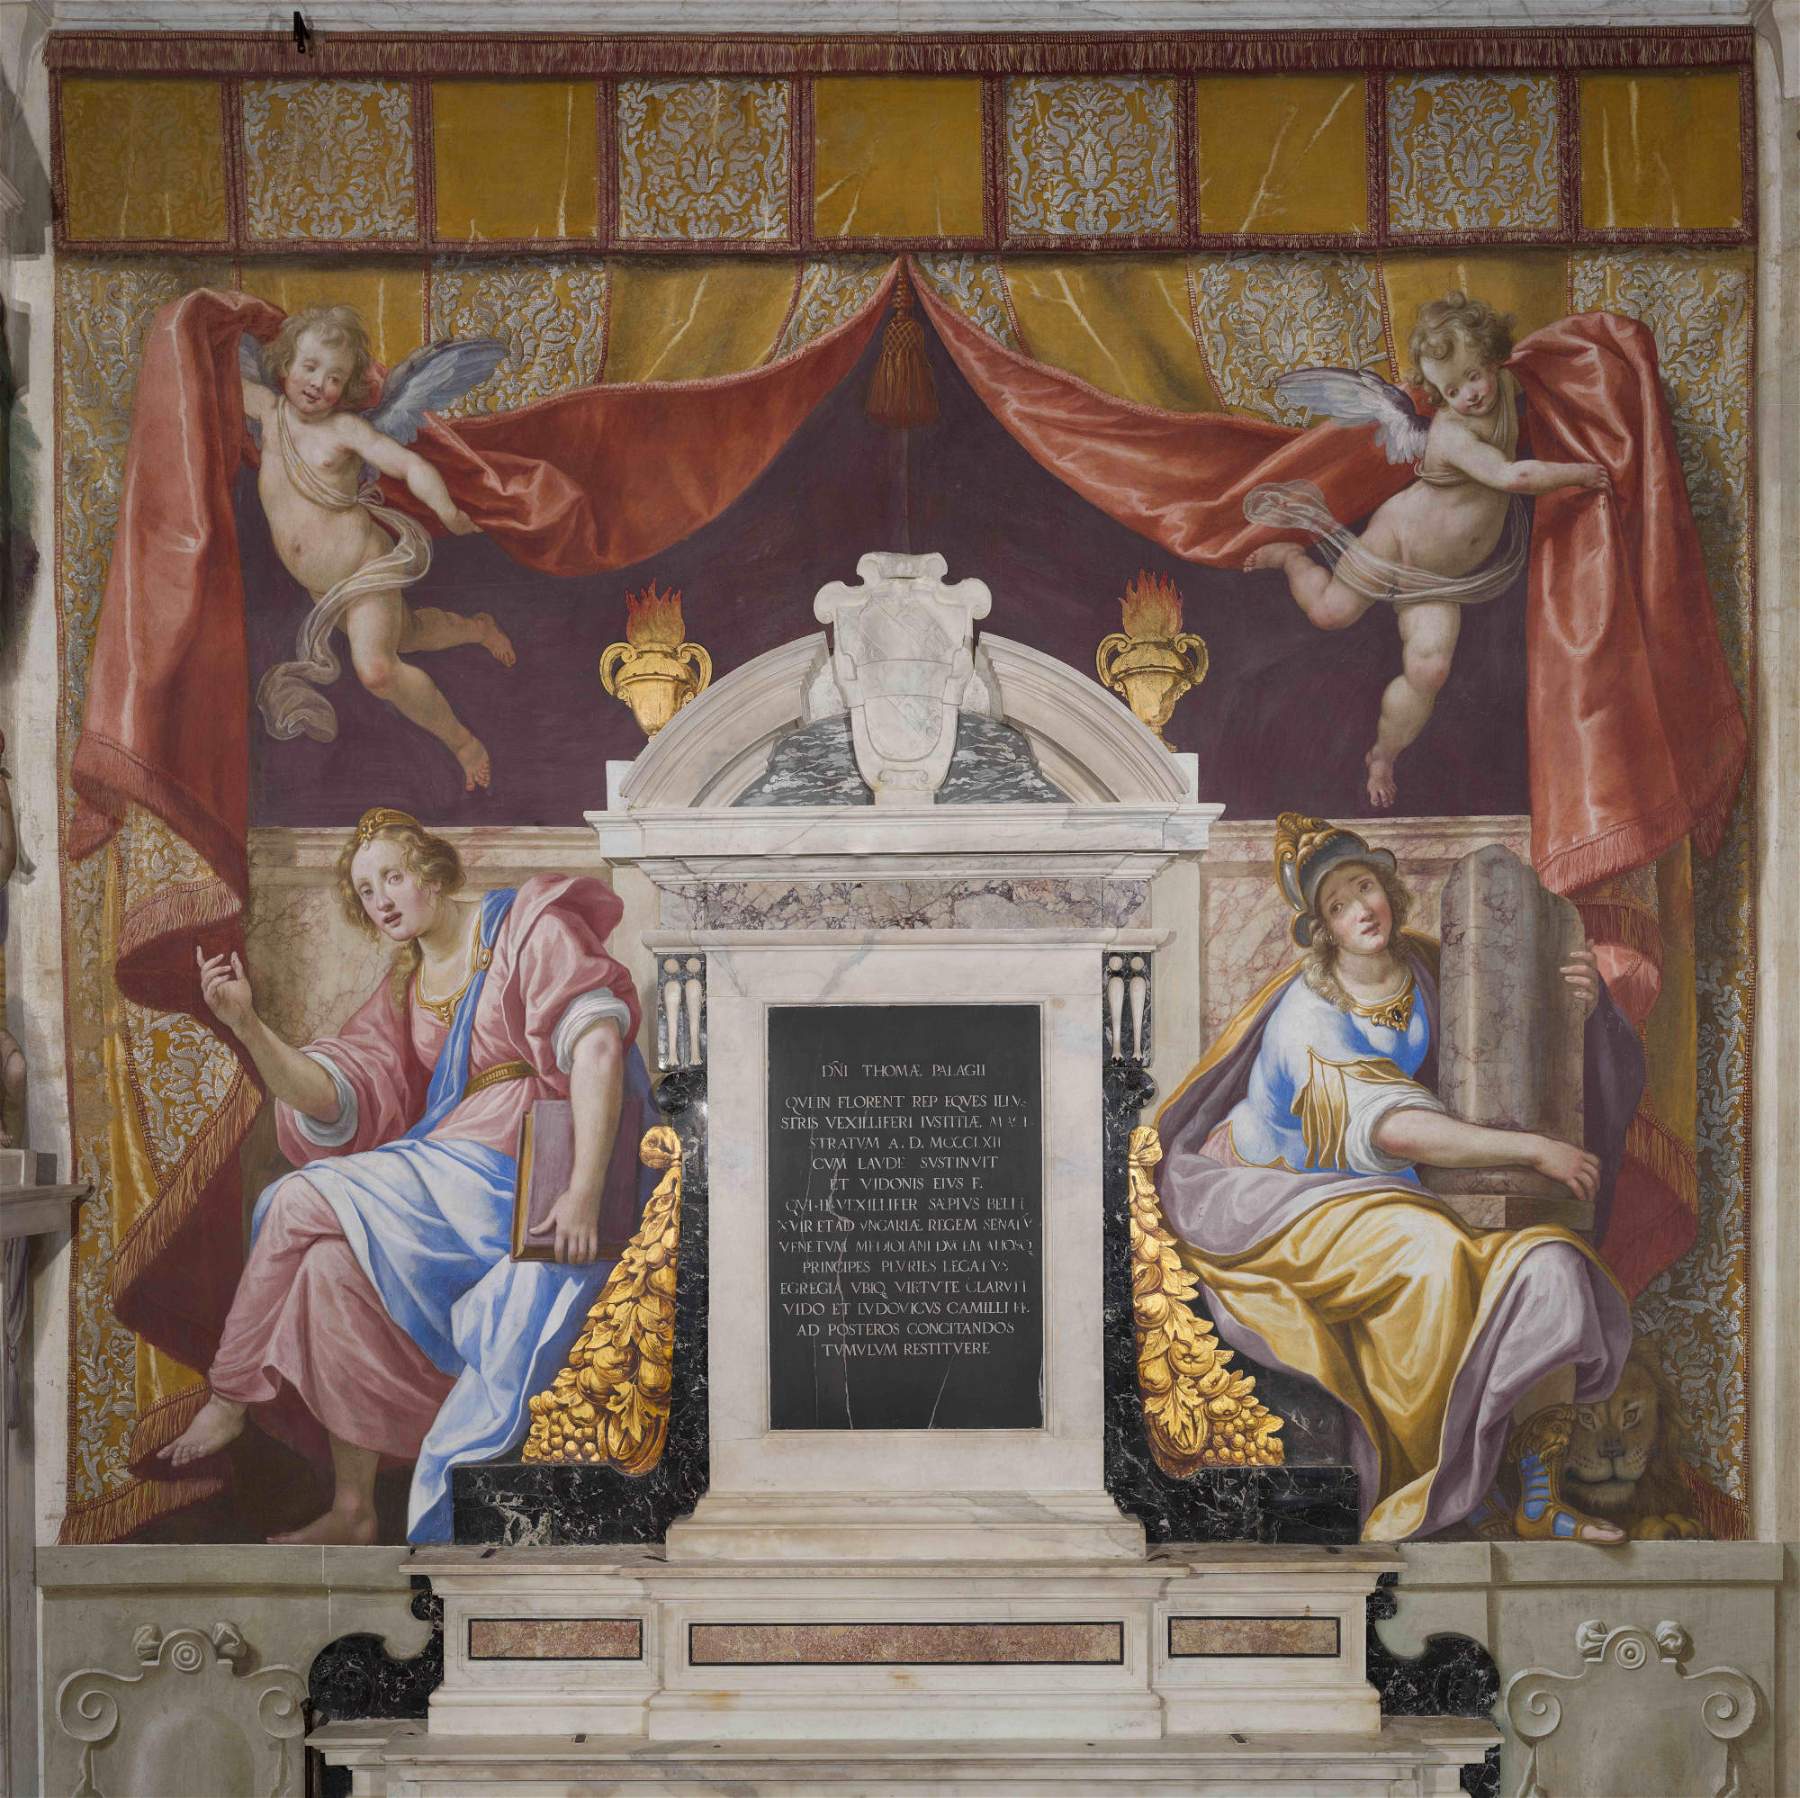 Florence, restored the Chapel of St. Nicholas in the Basilica of the Santissima Annunziata